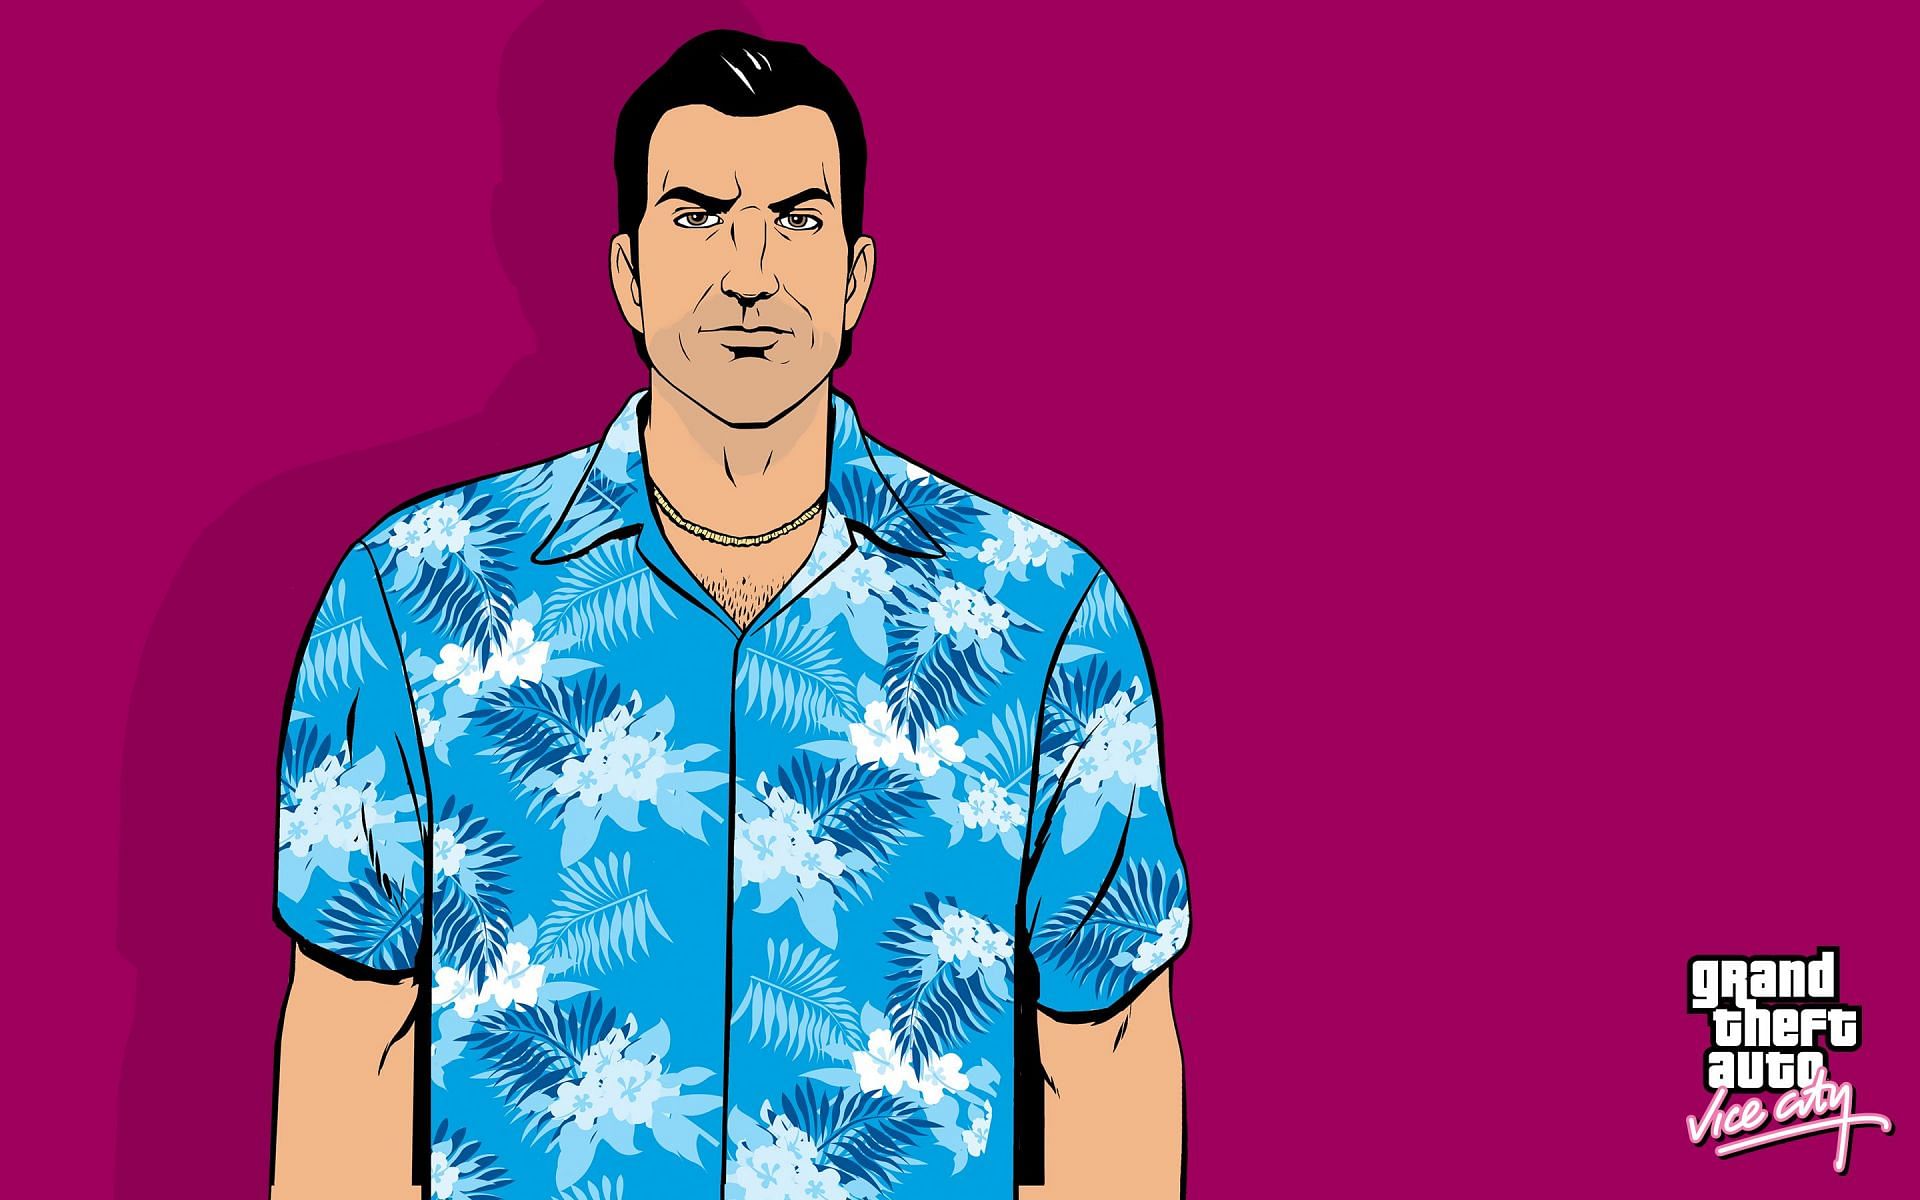 Tommy Vercetti is an iconic Grand Theft Auto anti-hero that players know and love (Image via Rockstar Games)